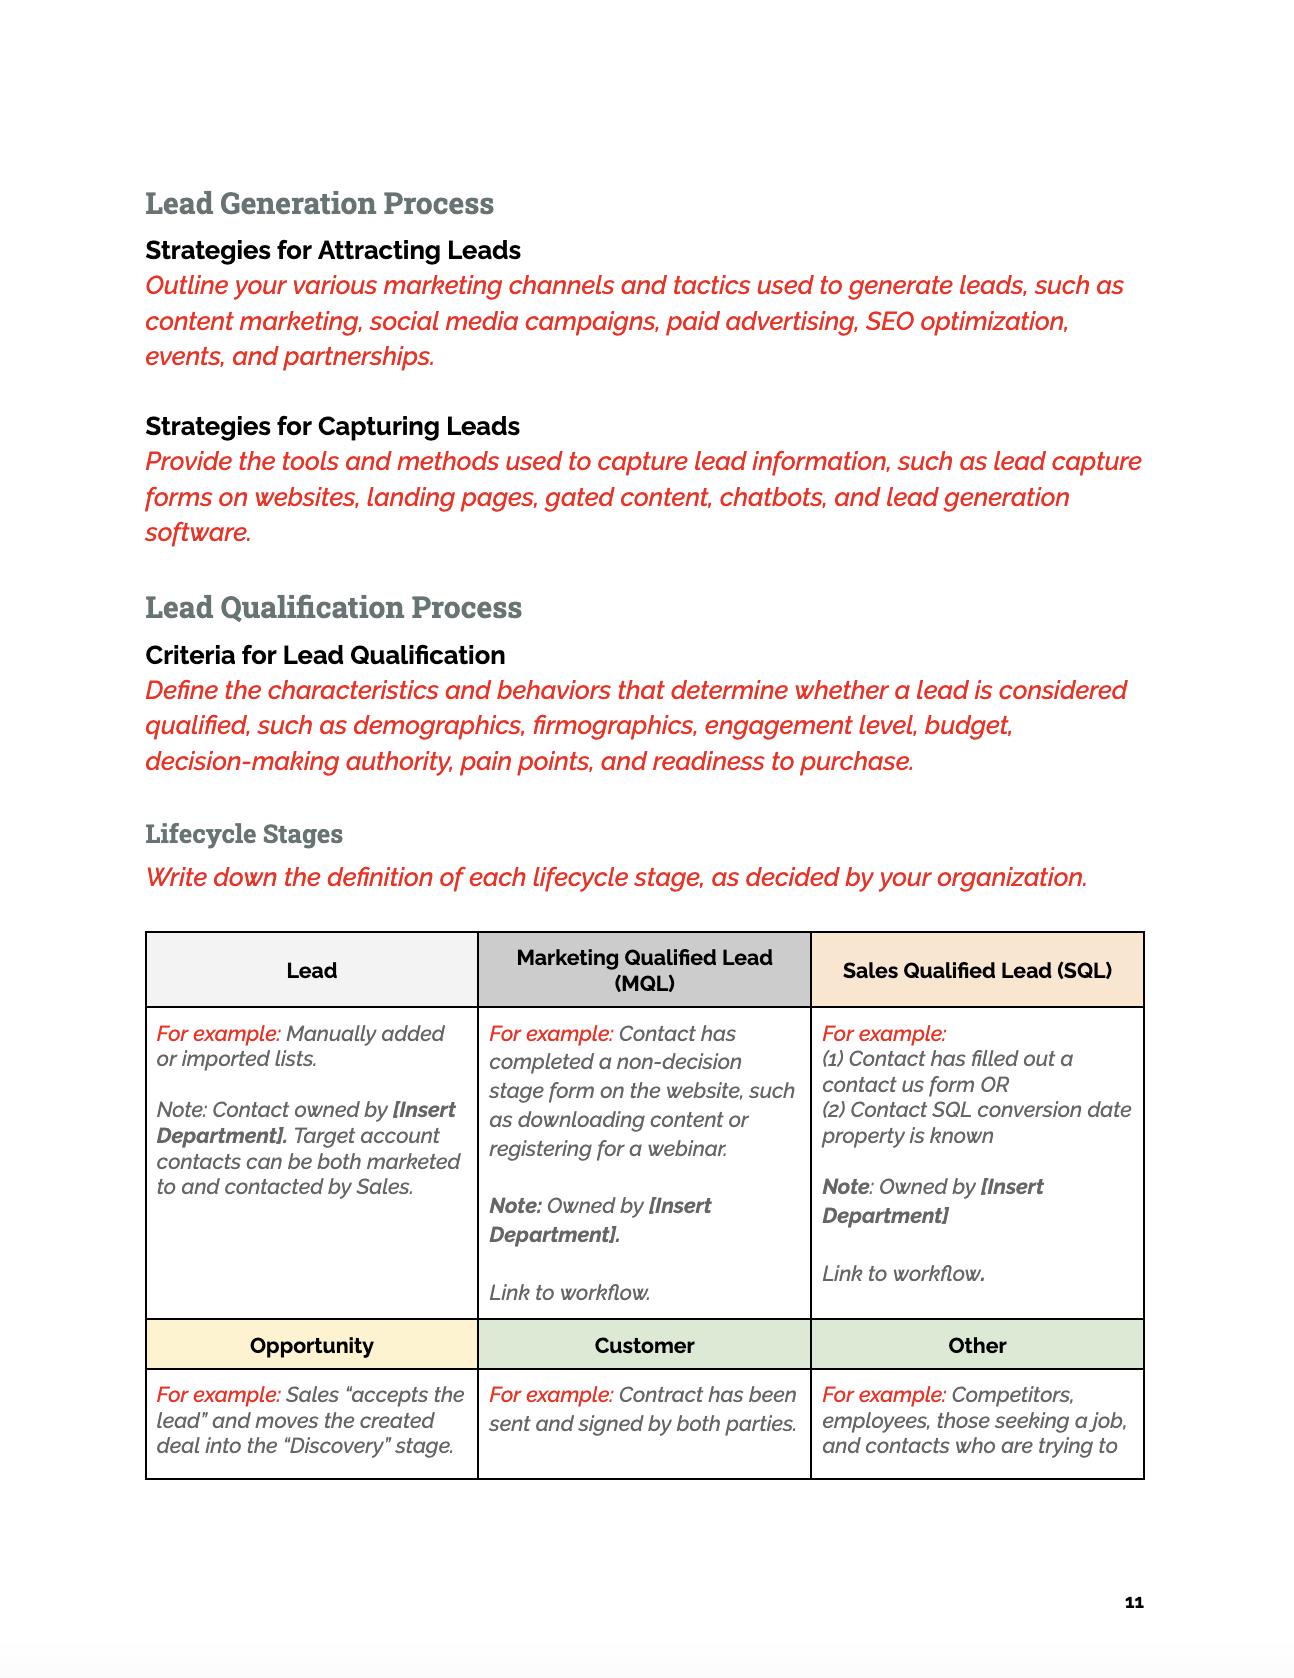 RevOps Playbook Template - lead generation process page